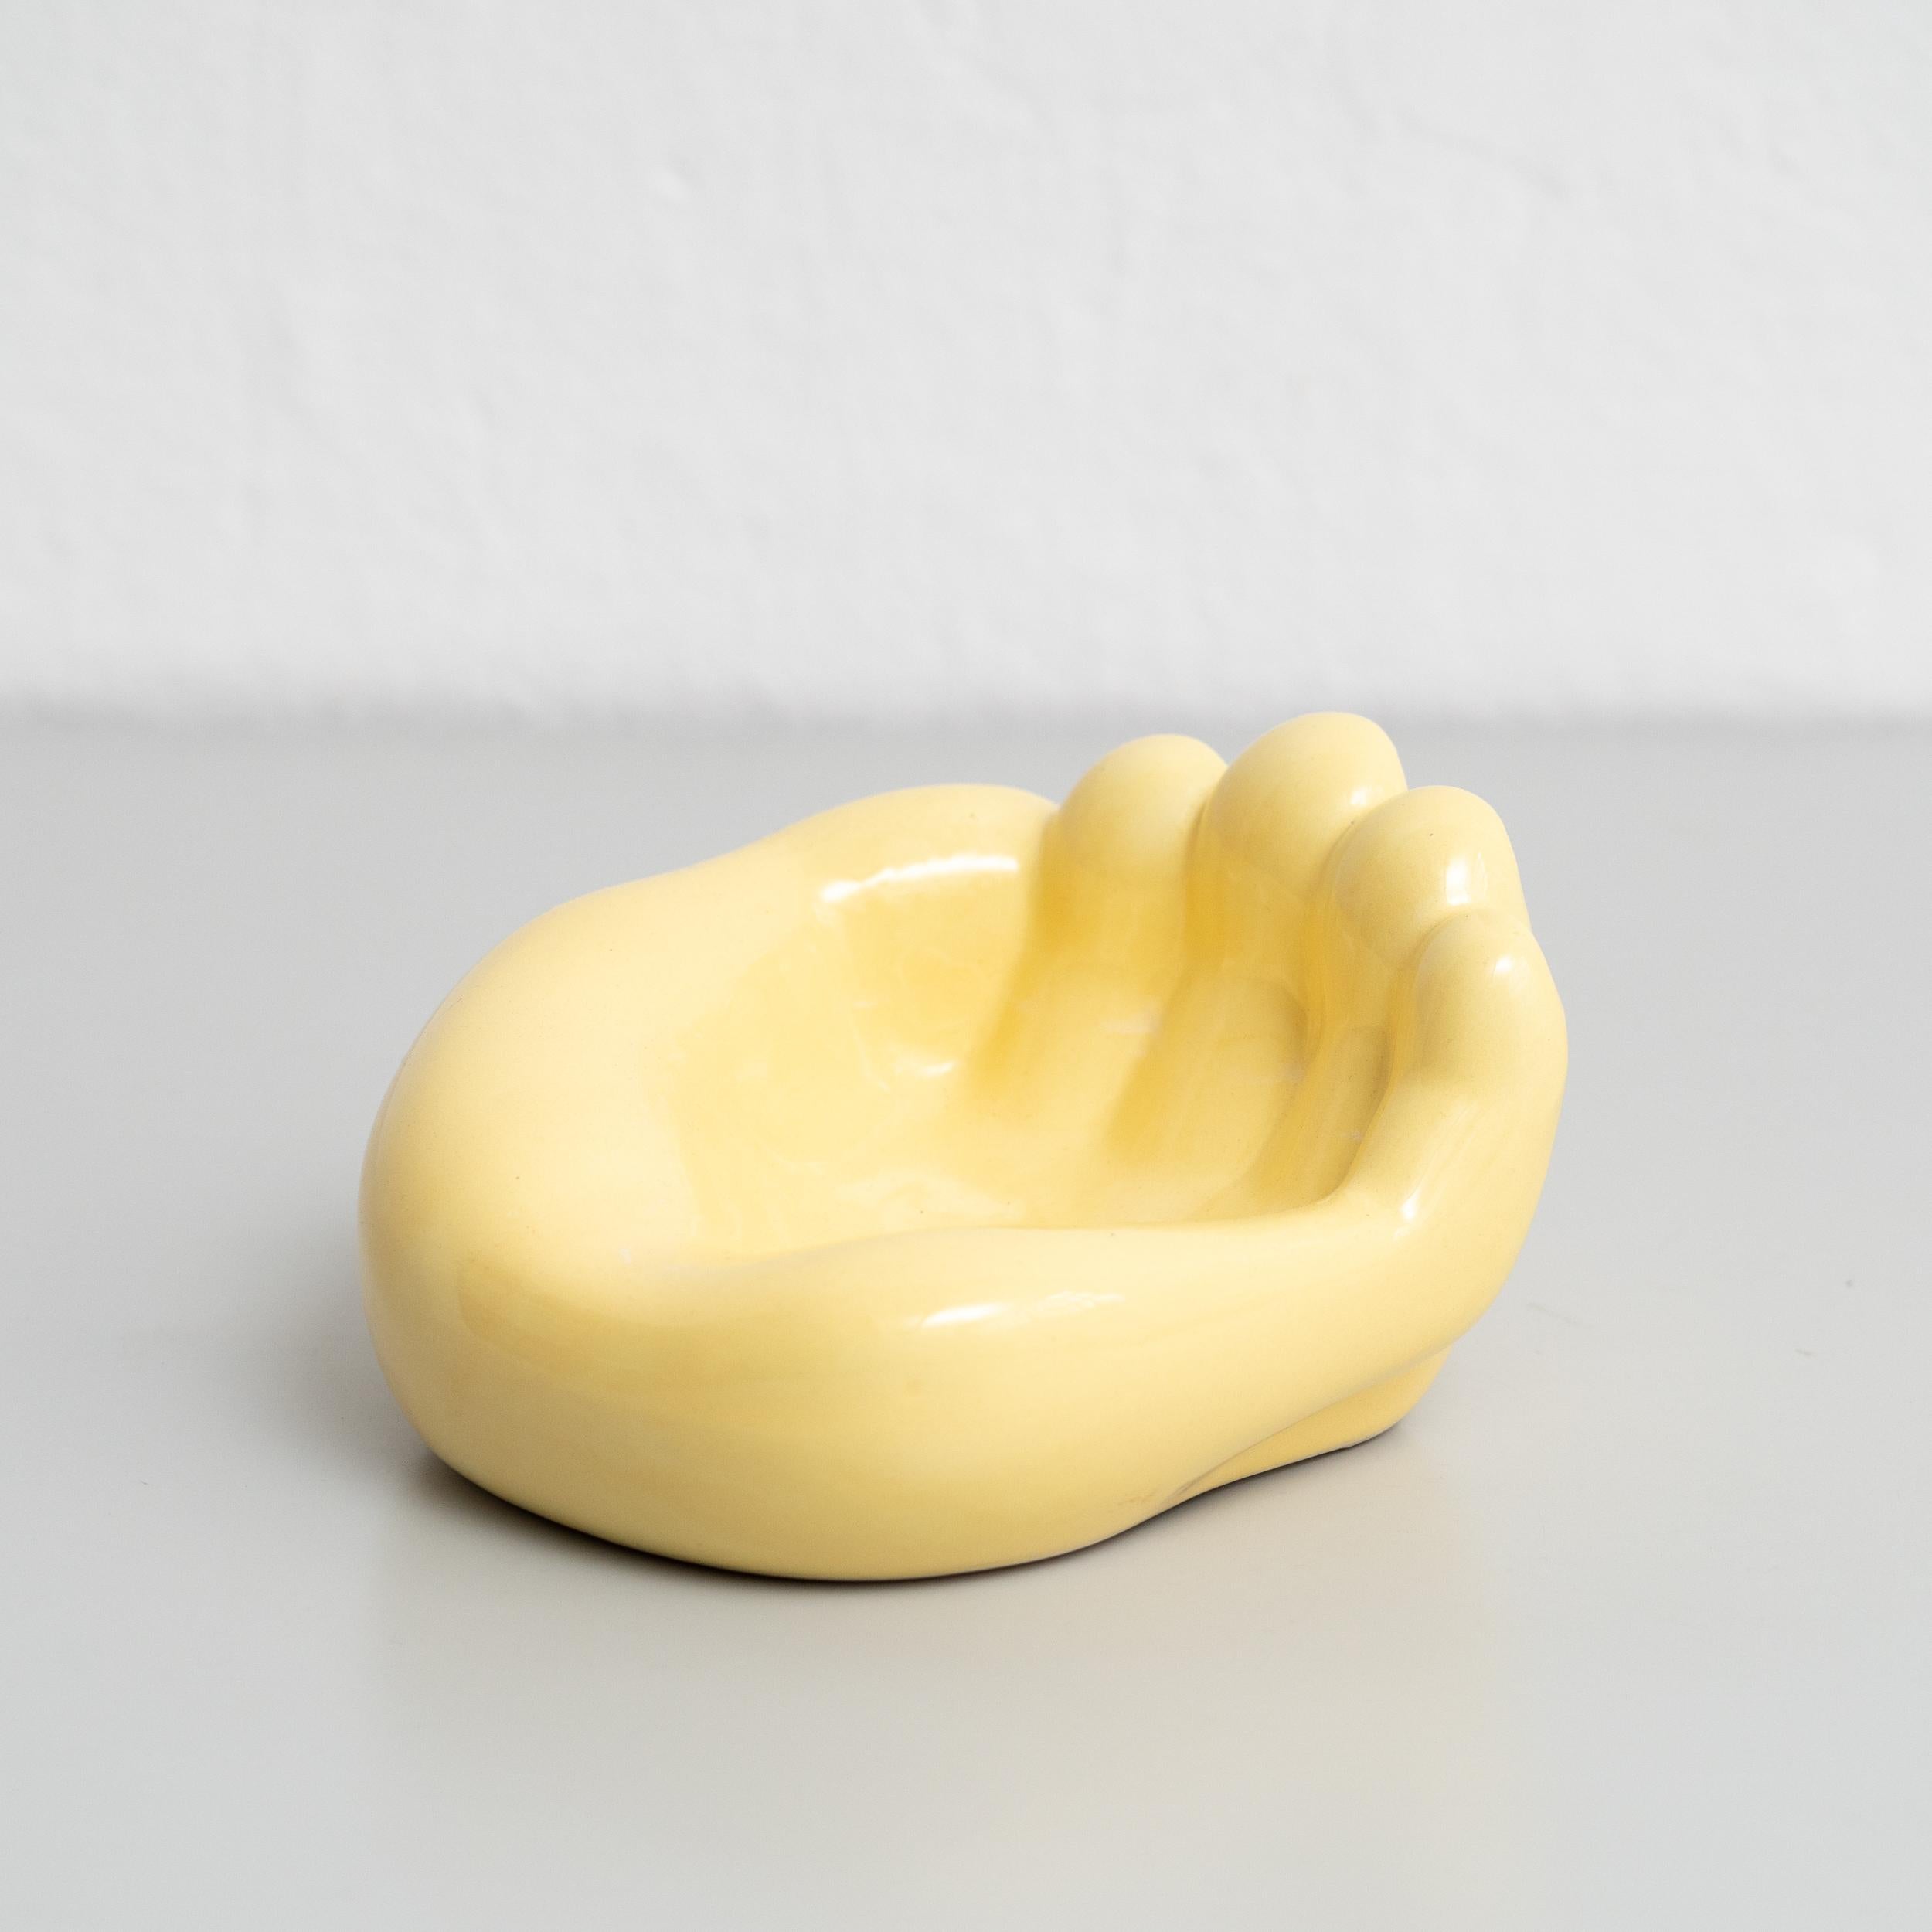 Immerse yourself in the sophisticated charm of mid-century modern design with this striking ashtray inspired by Georges Jouve. Crafted in France around 1950, this ceramic ashtray showcases the form of a large hand, adding a touch of whimsy to